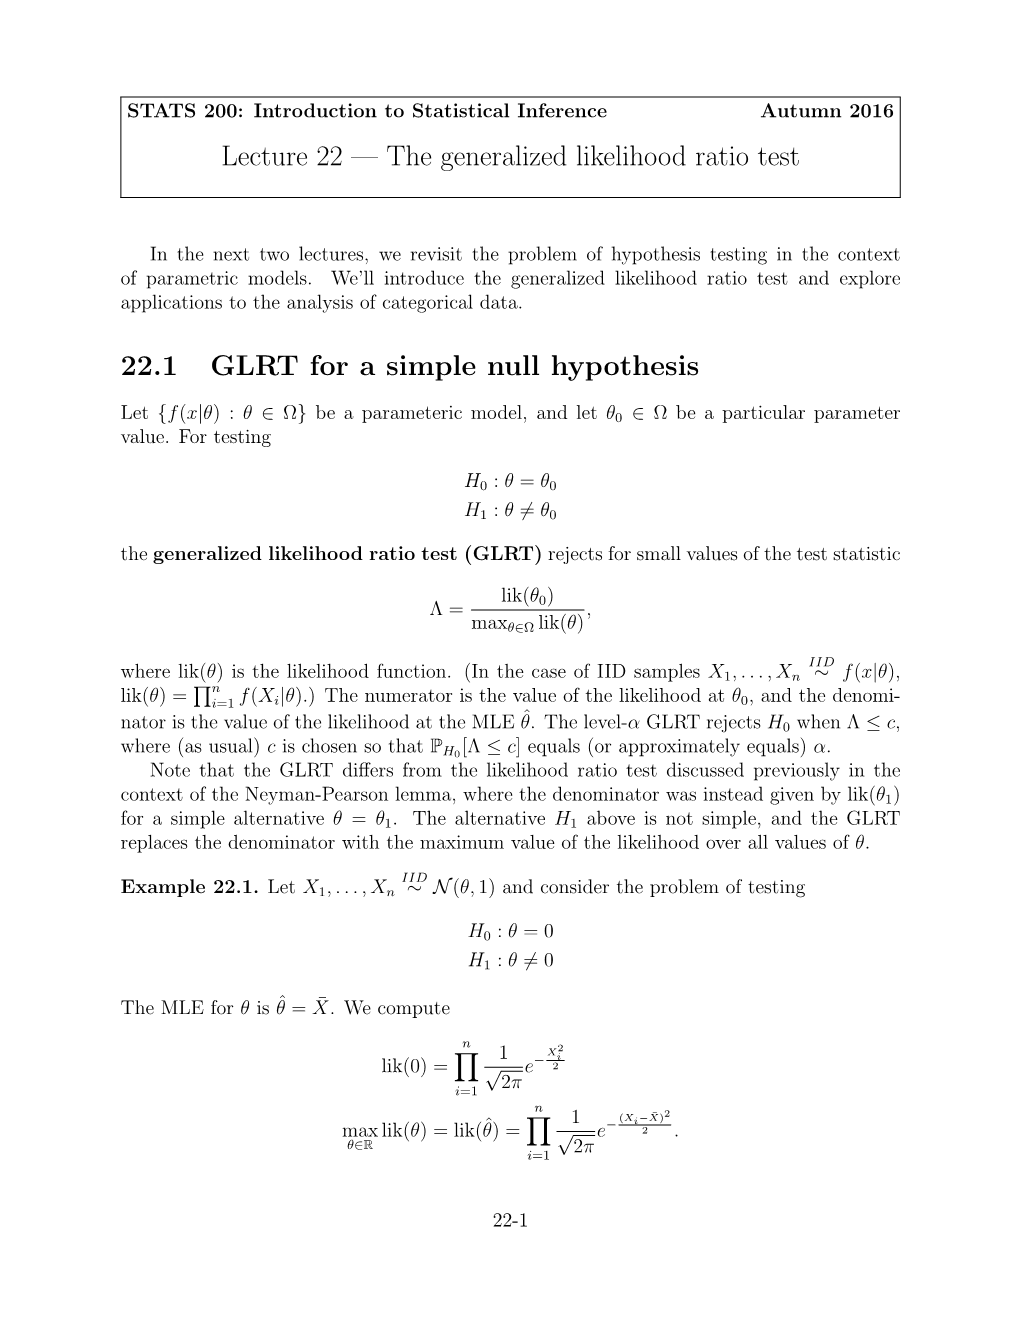 Lecture 22 — the Generalized Likelihood Ratio Test 22.1 GLRT for A